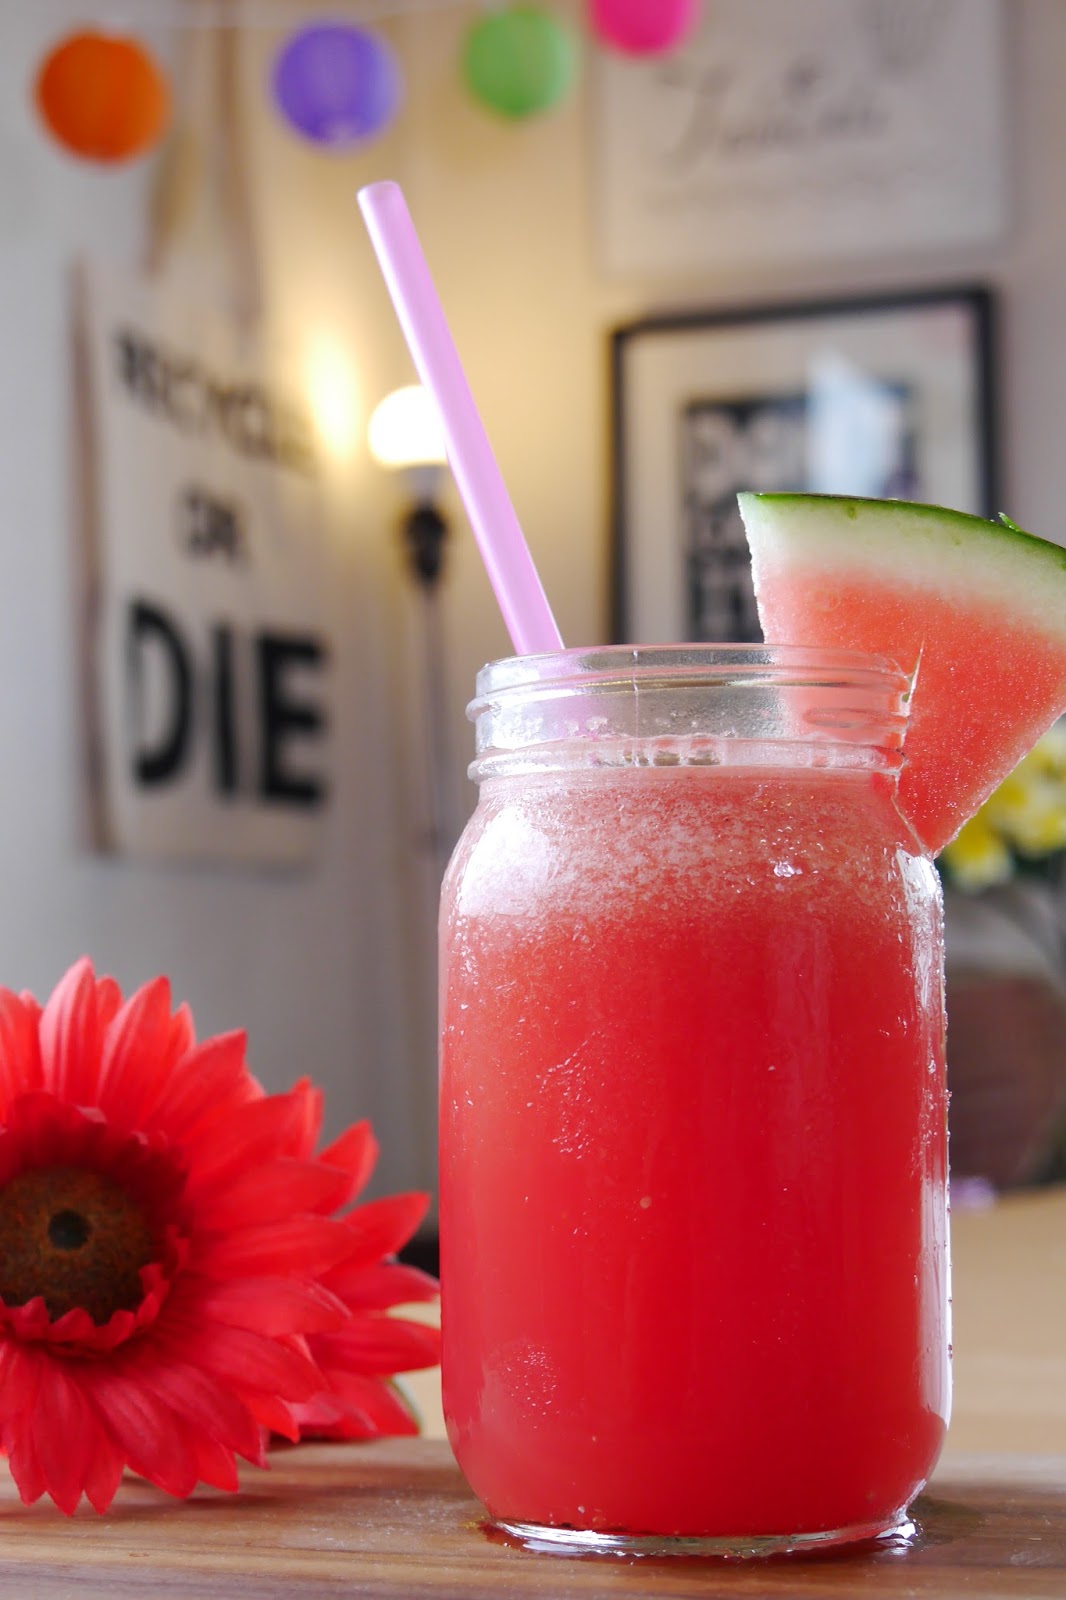 How To Make Watermelon Juice Recipe In Magelang City